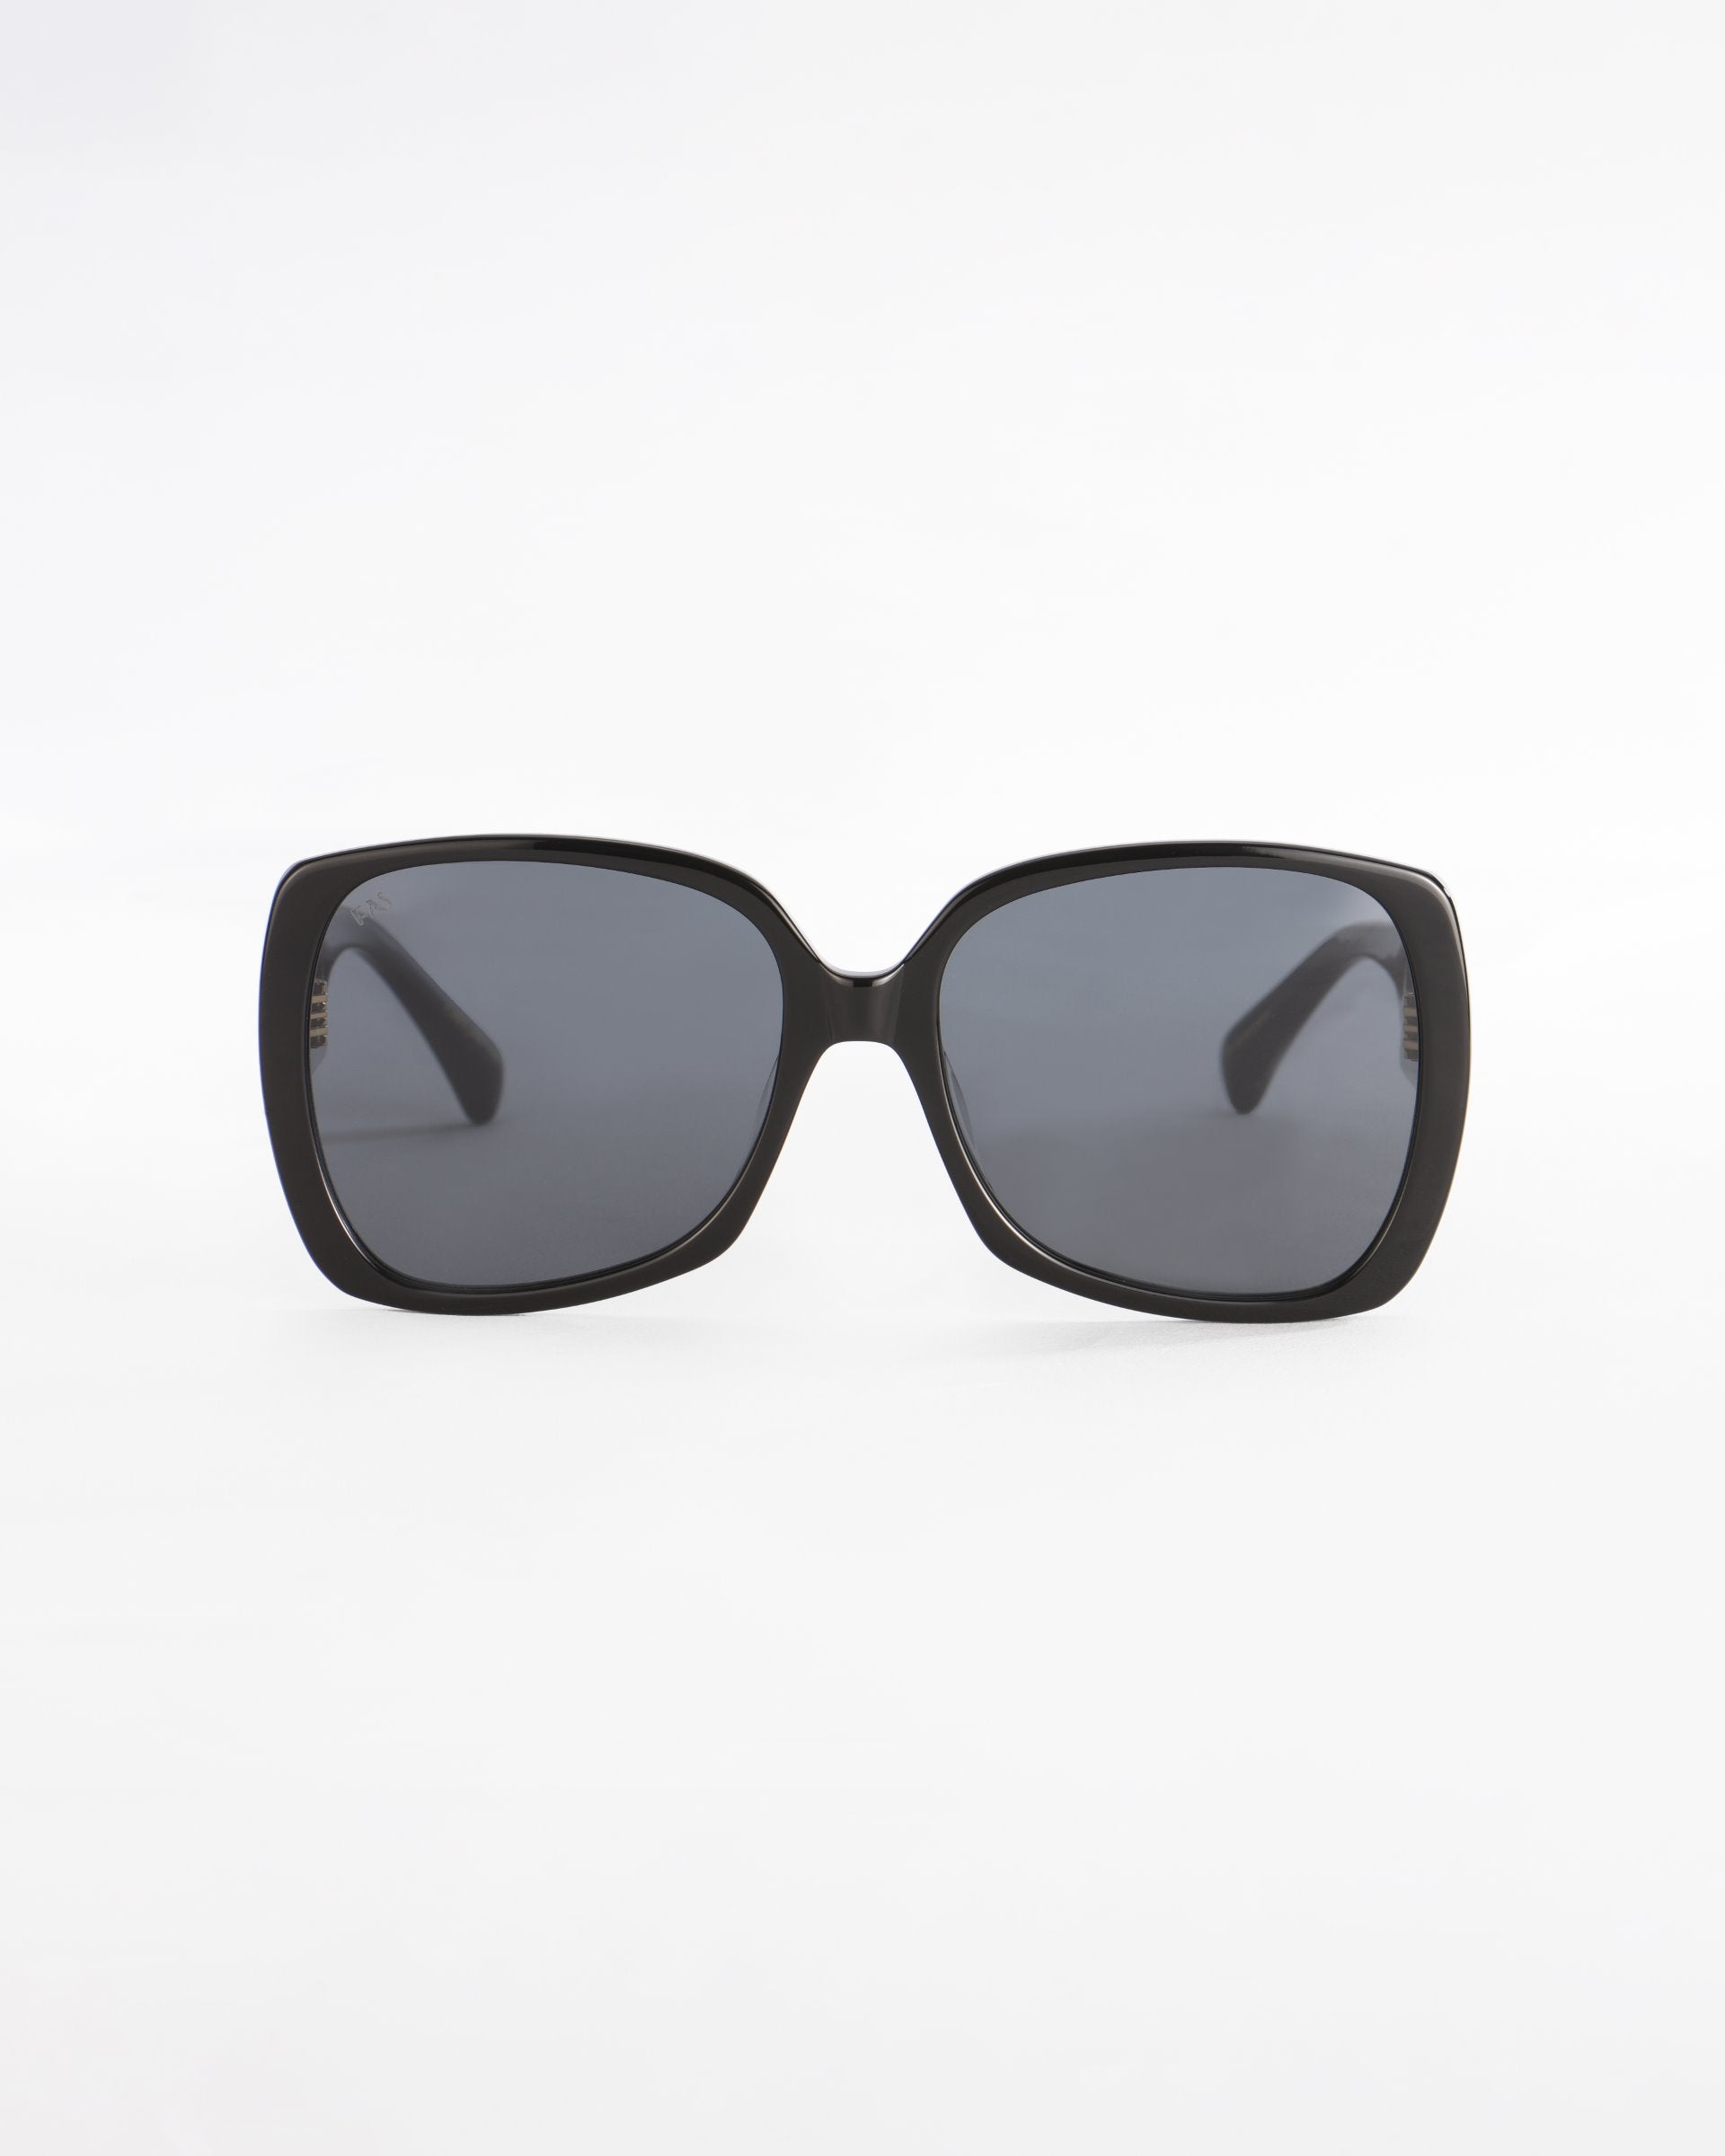 A pair of black, oversized square Odyssey sunglasses by For Art's Sake® with dark tinted, lightweight nylon lenses is displayed against a plain white background. The design is simple and modern, featuring thick frames made from plant-based acetate and wide arms.